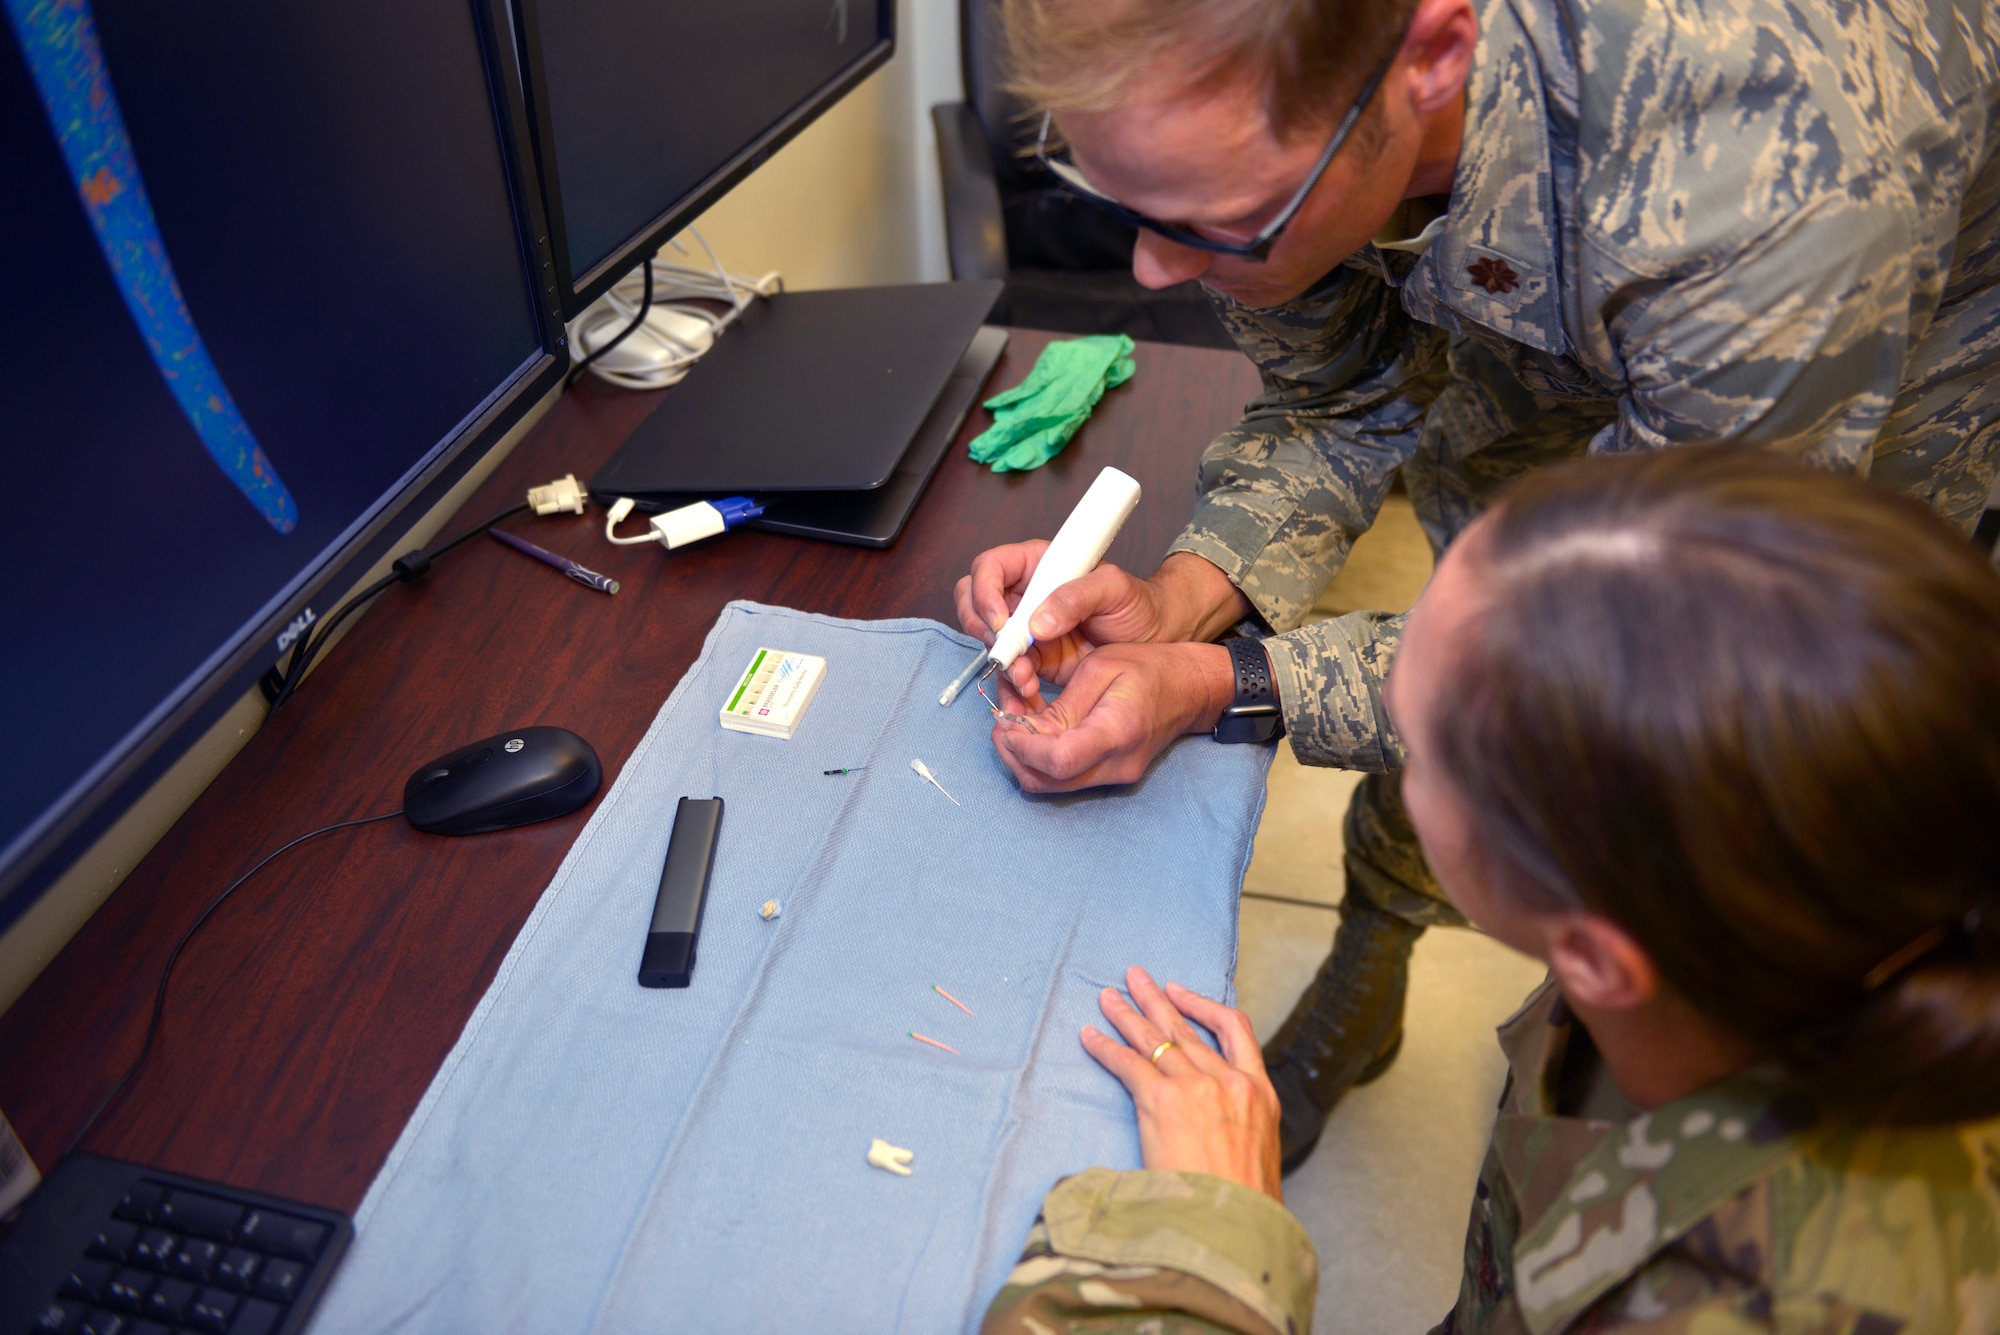 Maj. Timothy Carlson, 81st Dental Squadron endodontic resident, demonstrates a root canal to Col. Heather Blackwell, 81st Training Wing commander, at the Keesler Dental Clinic at Keesler Air Force Base, Mississippi, June 11, 2019. Blackwell toured the Keesler Medical Center to become familiar with the 81st Medical Group's mission and capabilities. (U.S. Air Force photo by Airman Seth Haddix)